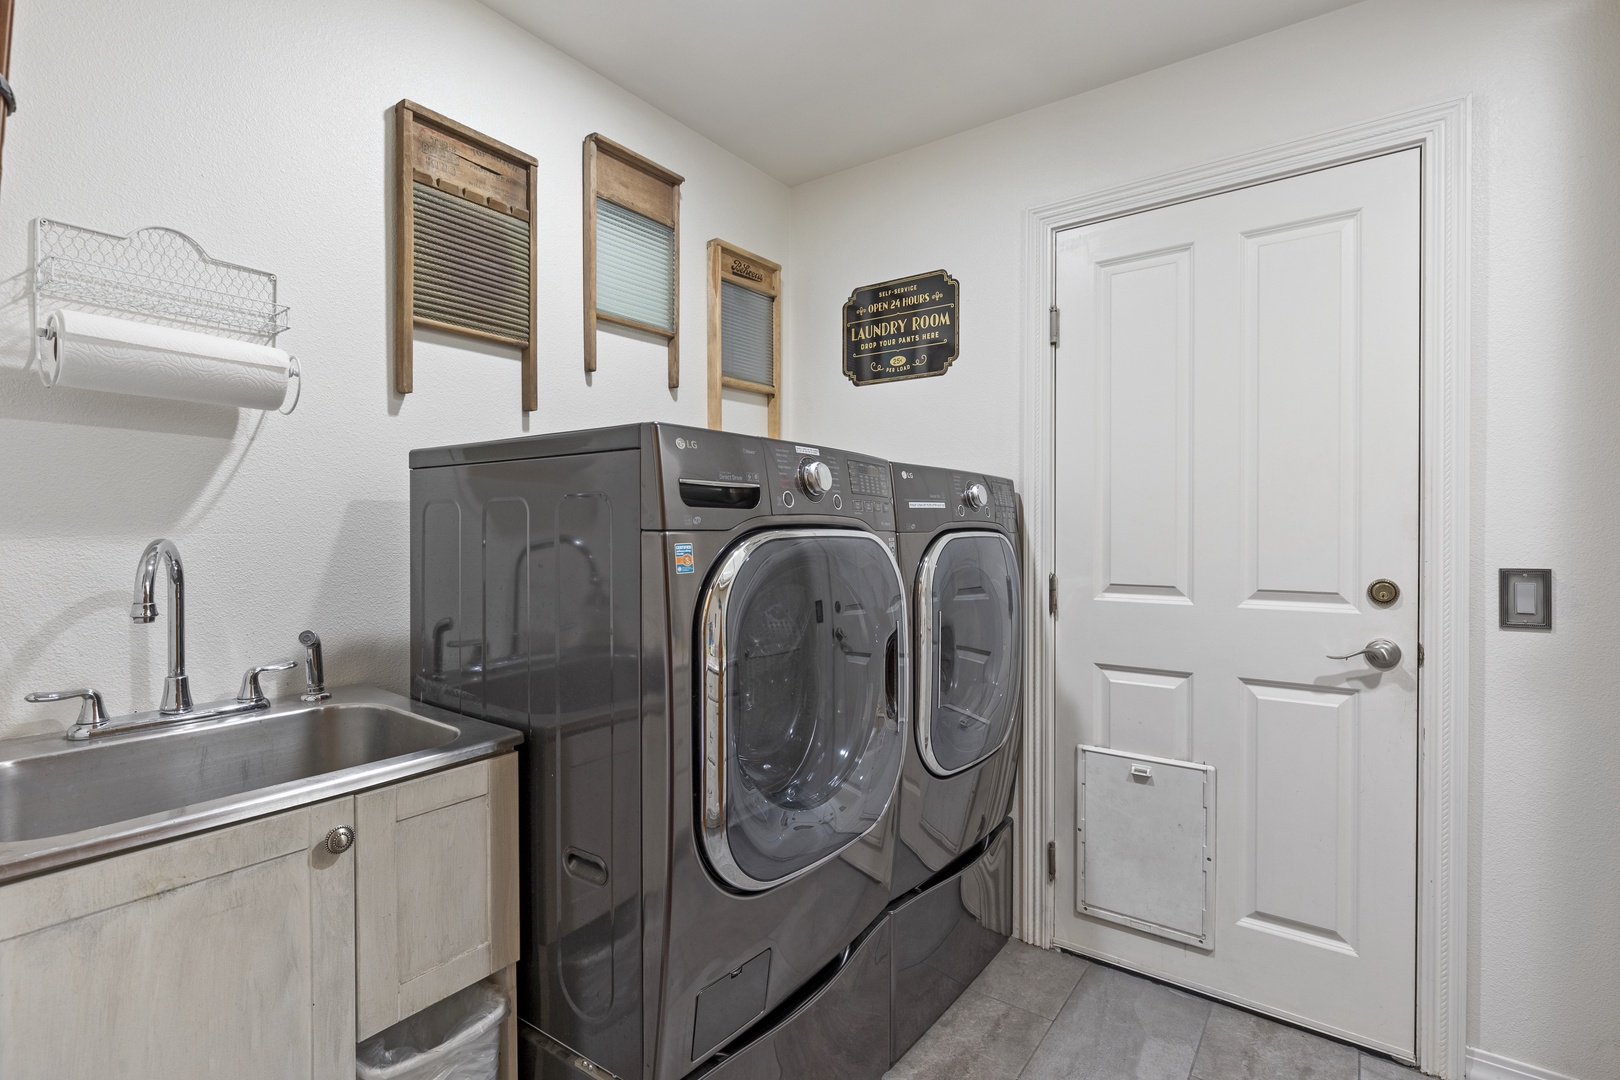 Laundry room located on lower level